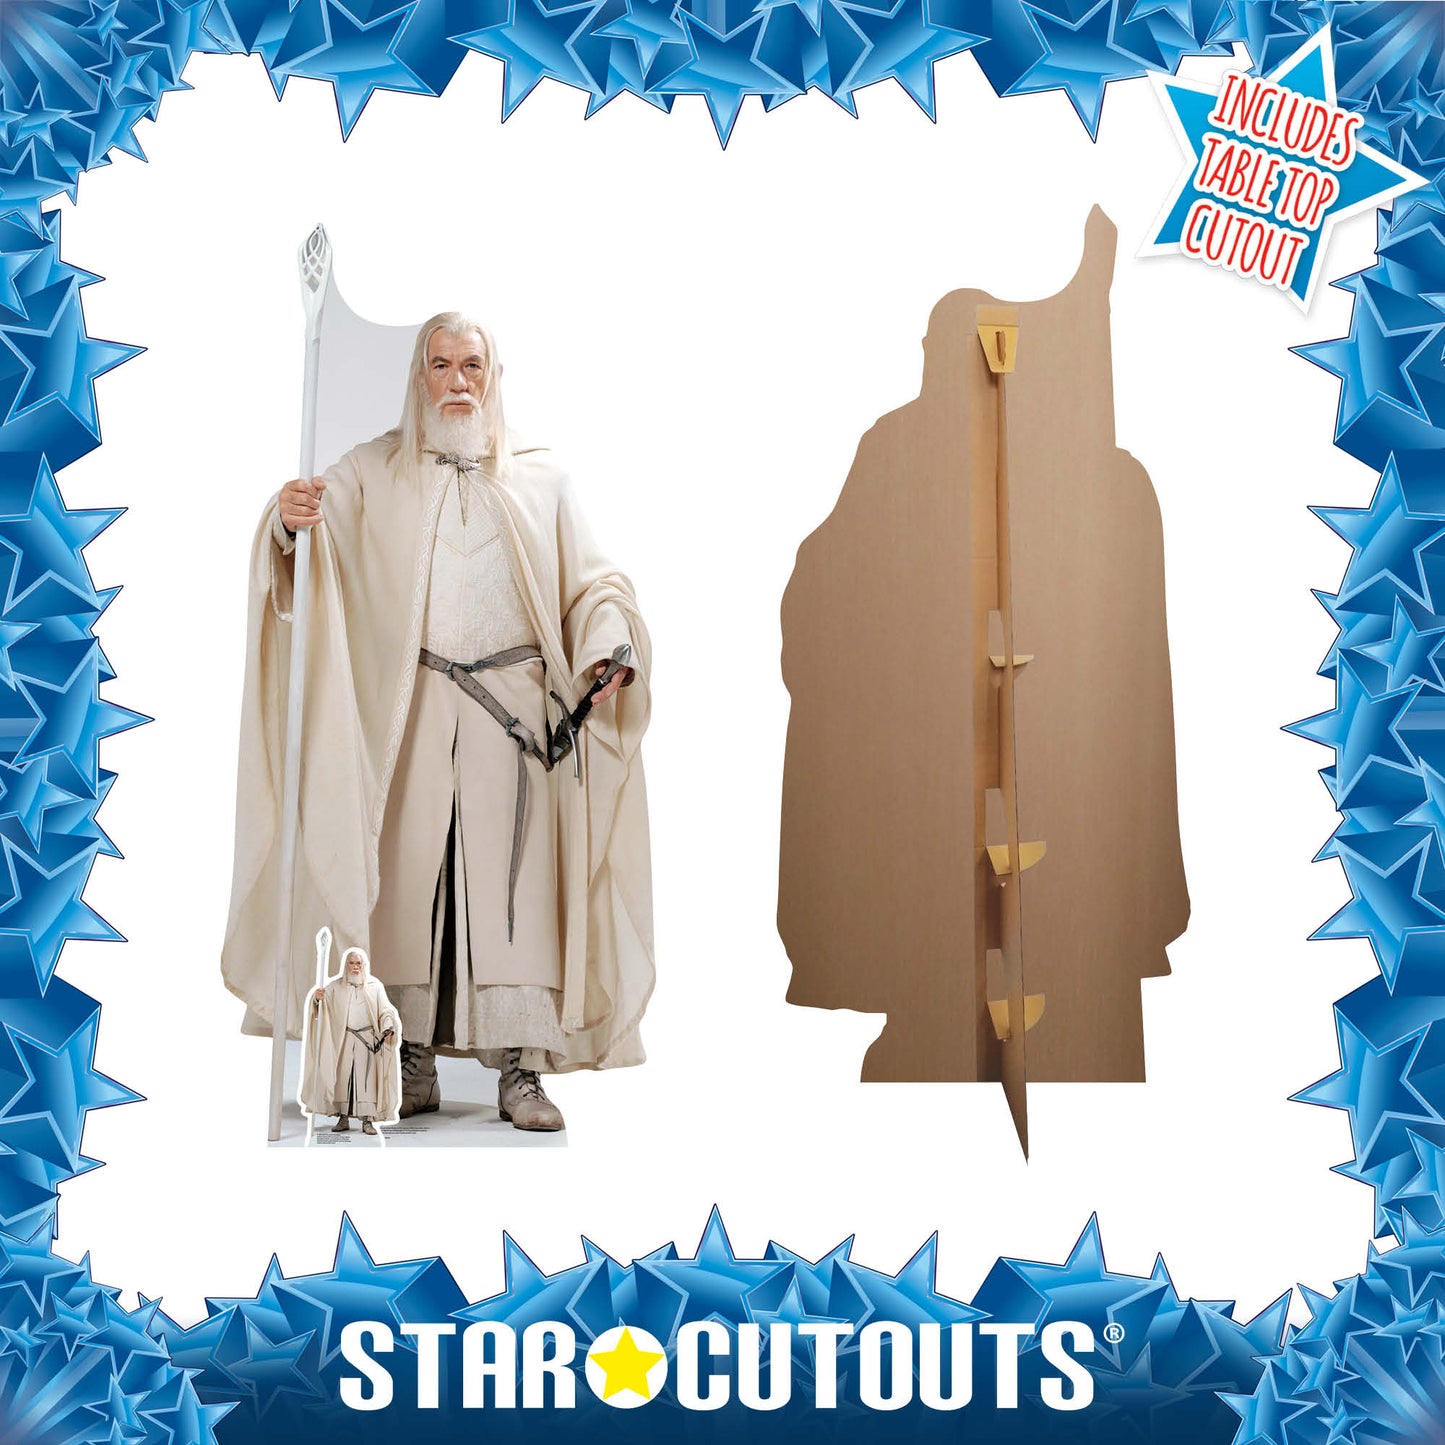 Gandalf the White The Lord of the Rings Cardboard Cutout Lifesize